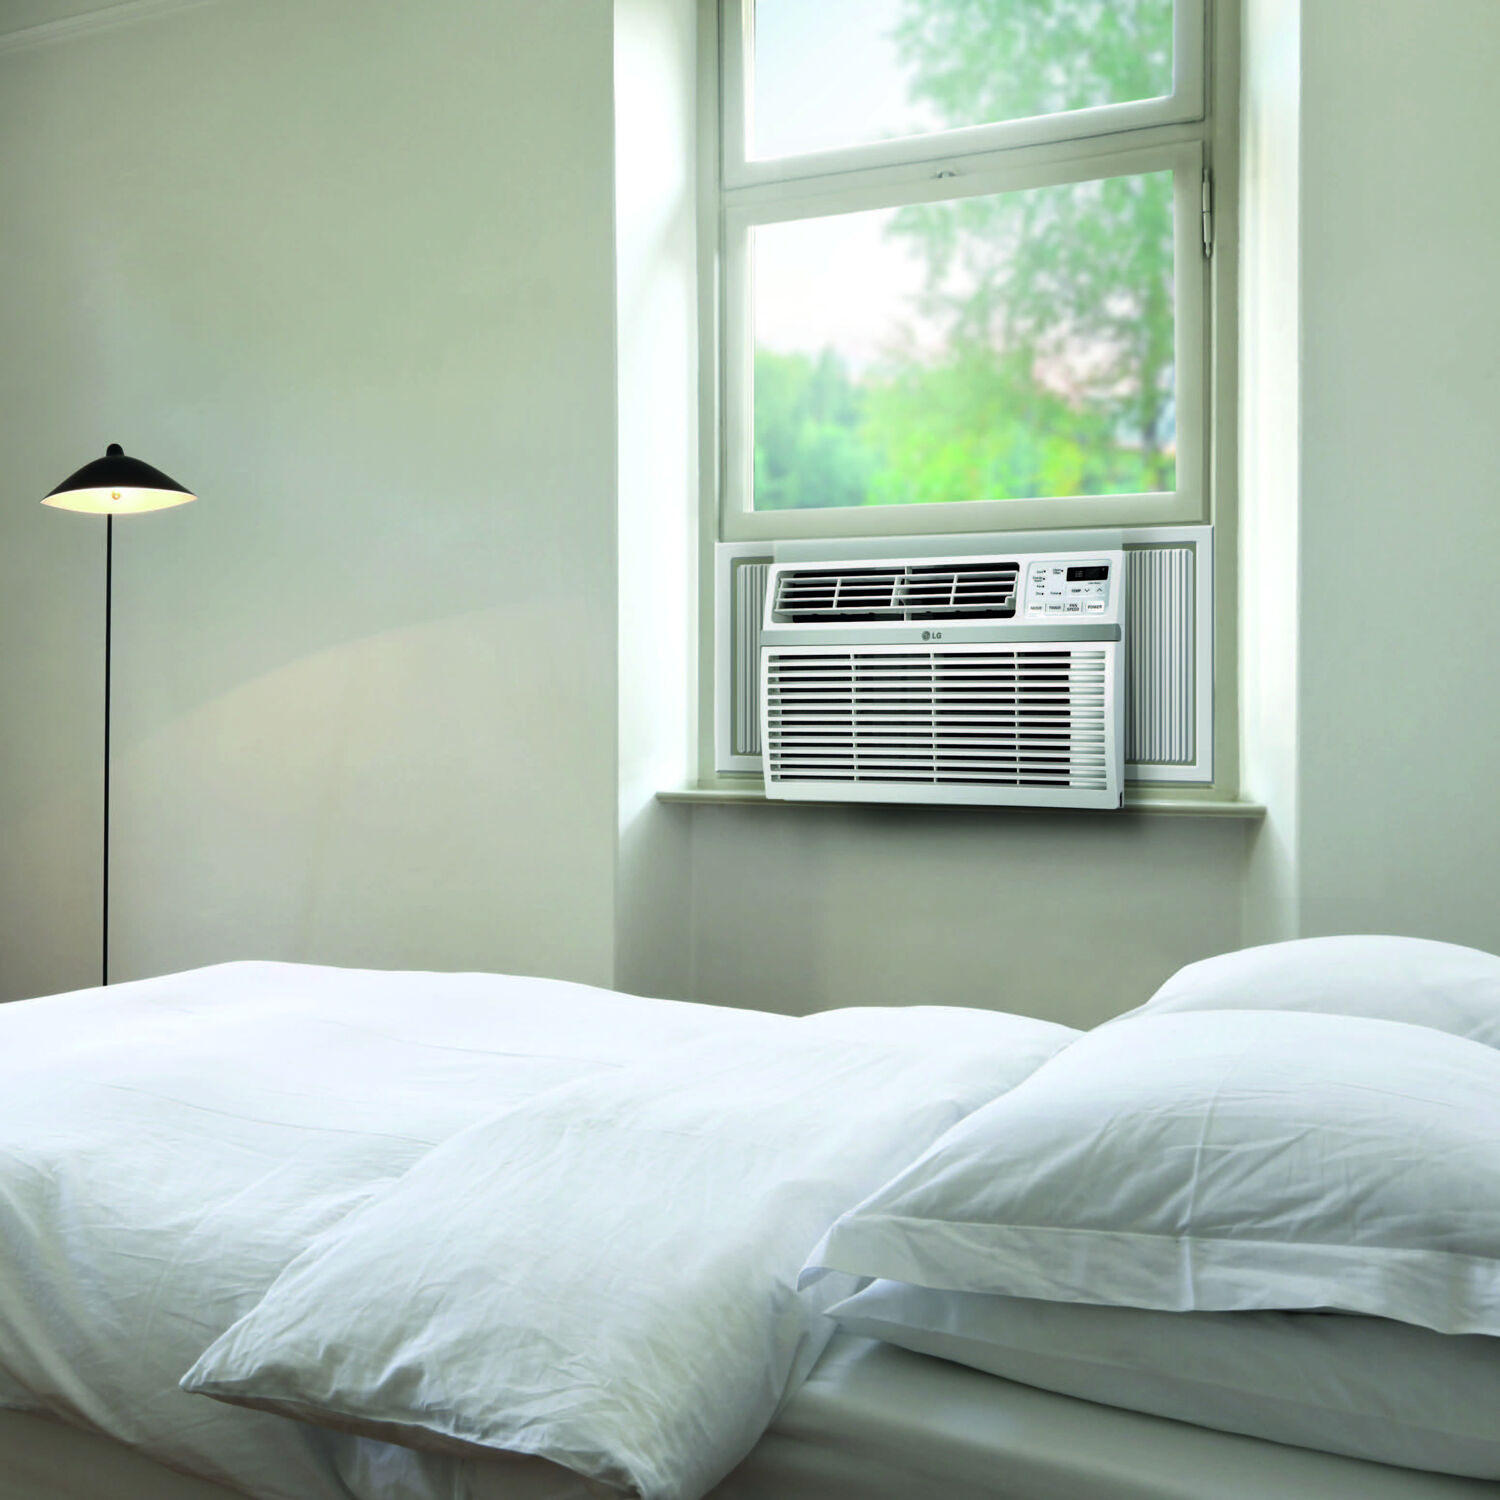 LG 8,000 BTU 115V Window-Mounted Air Conditioner with Wi-Fi Control - image 3 of 11